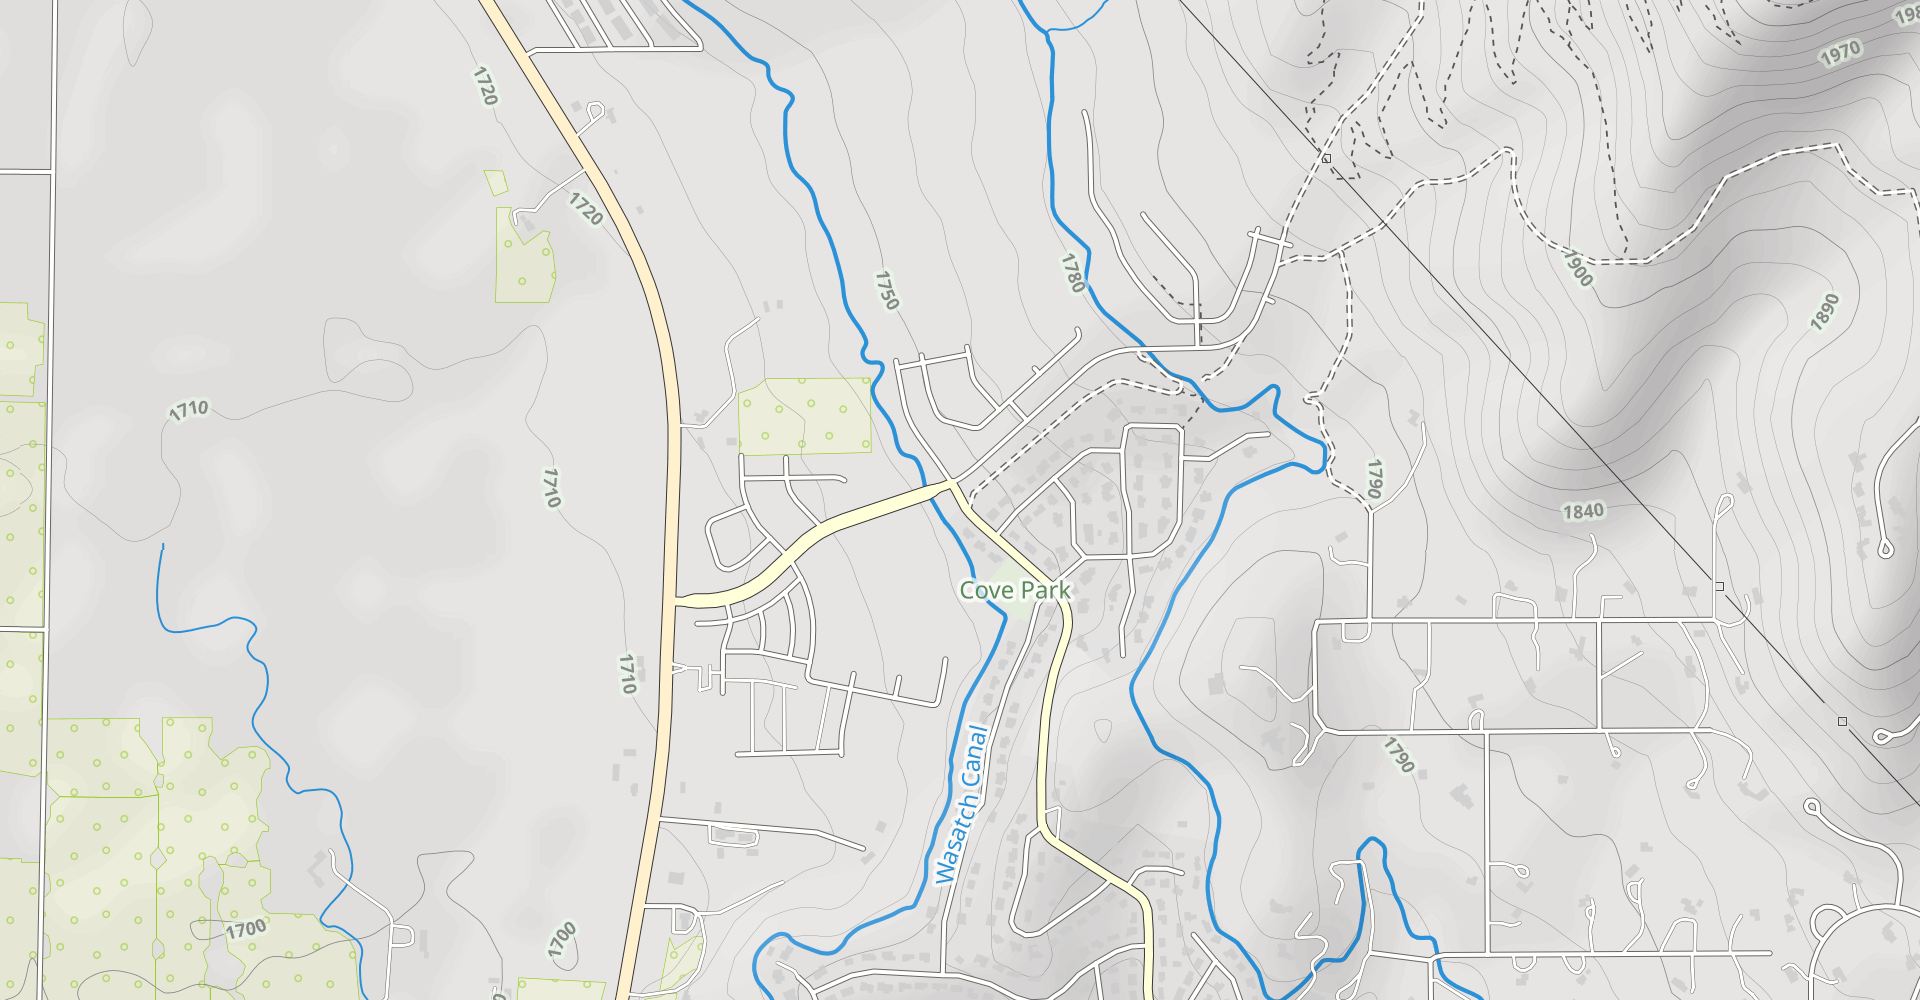 Coyote Canyon Loop from Coyote Lane